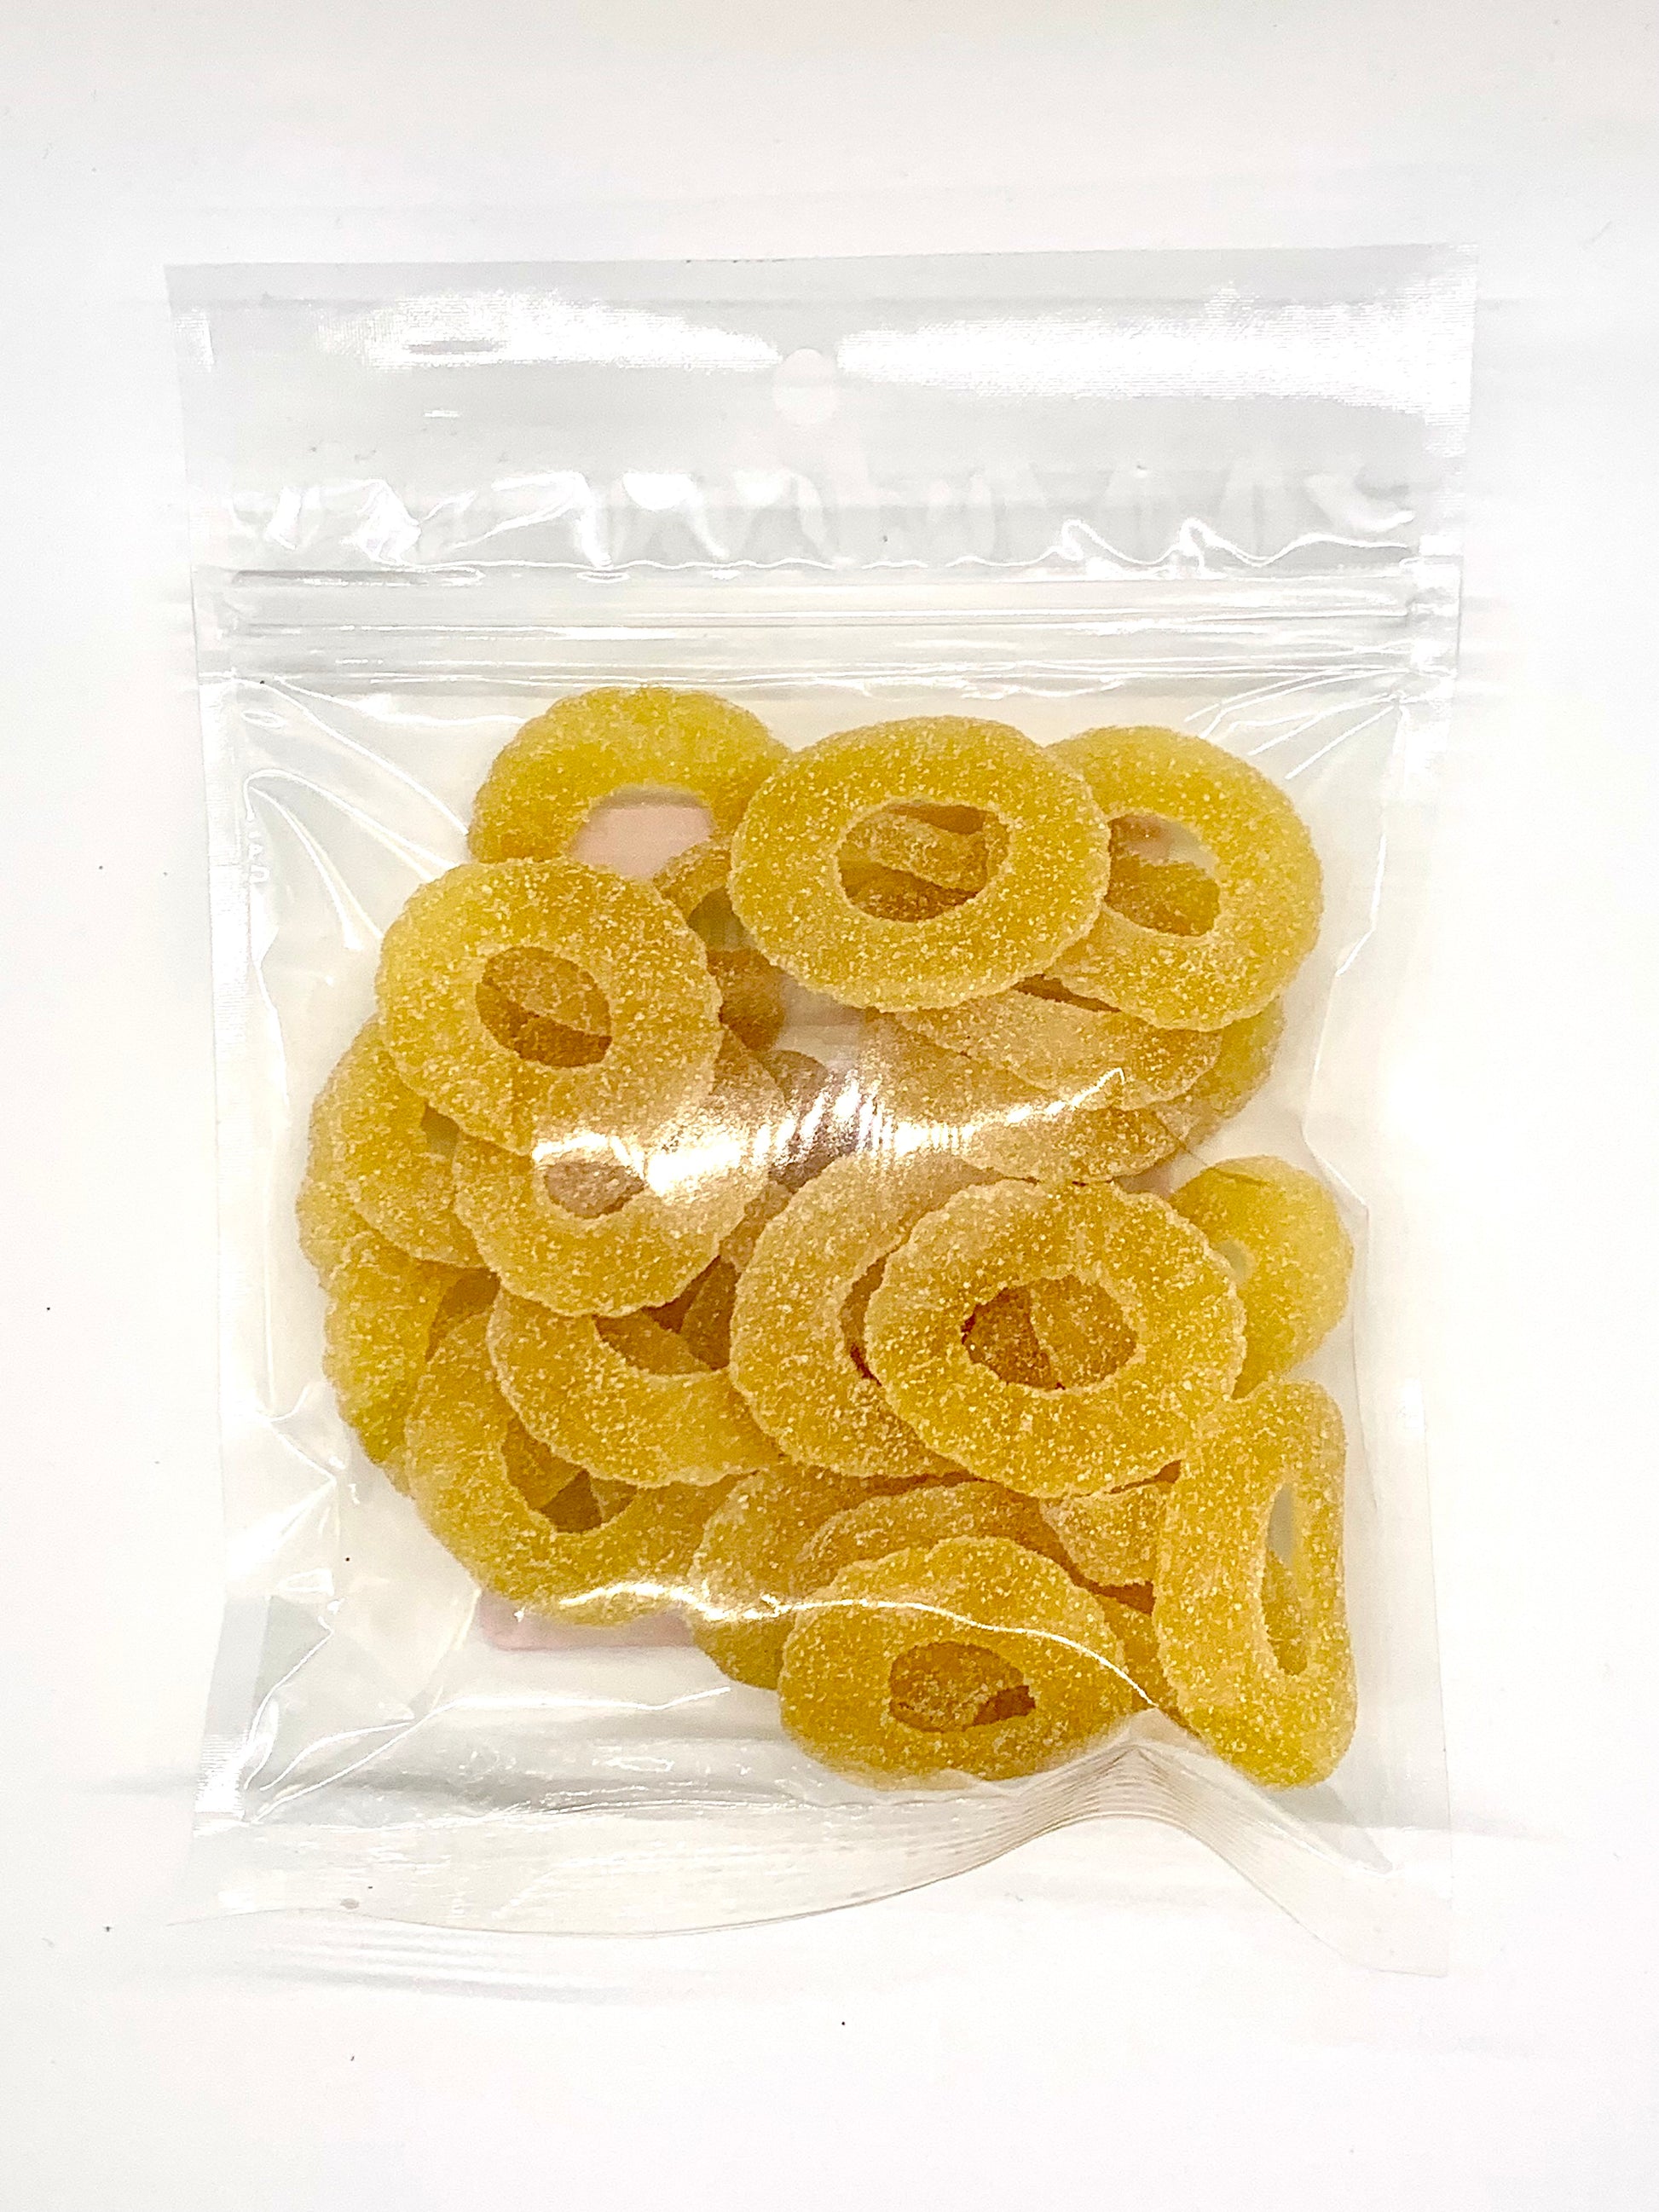 (NEW) Gummy Pineapple Rings - Wholesale Unlimited Inc.